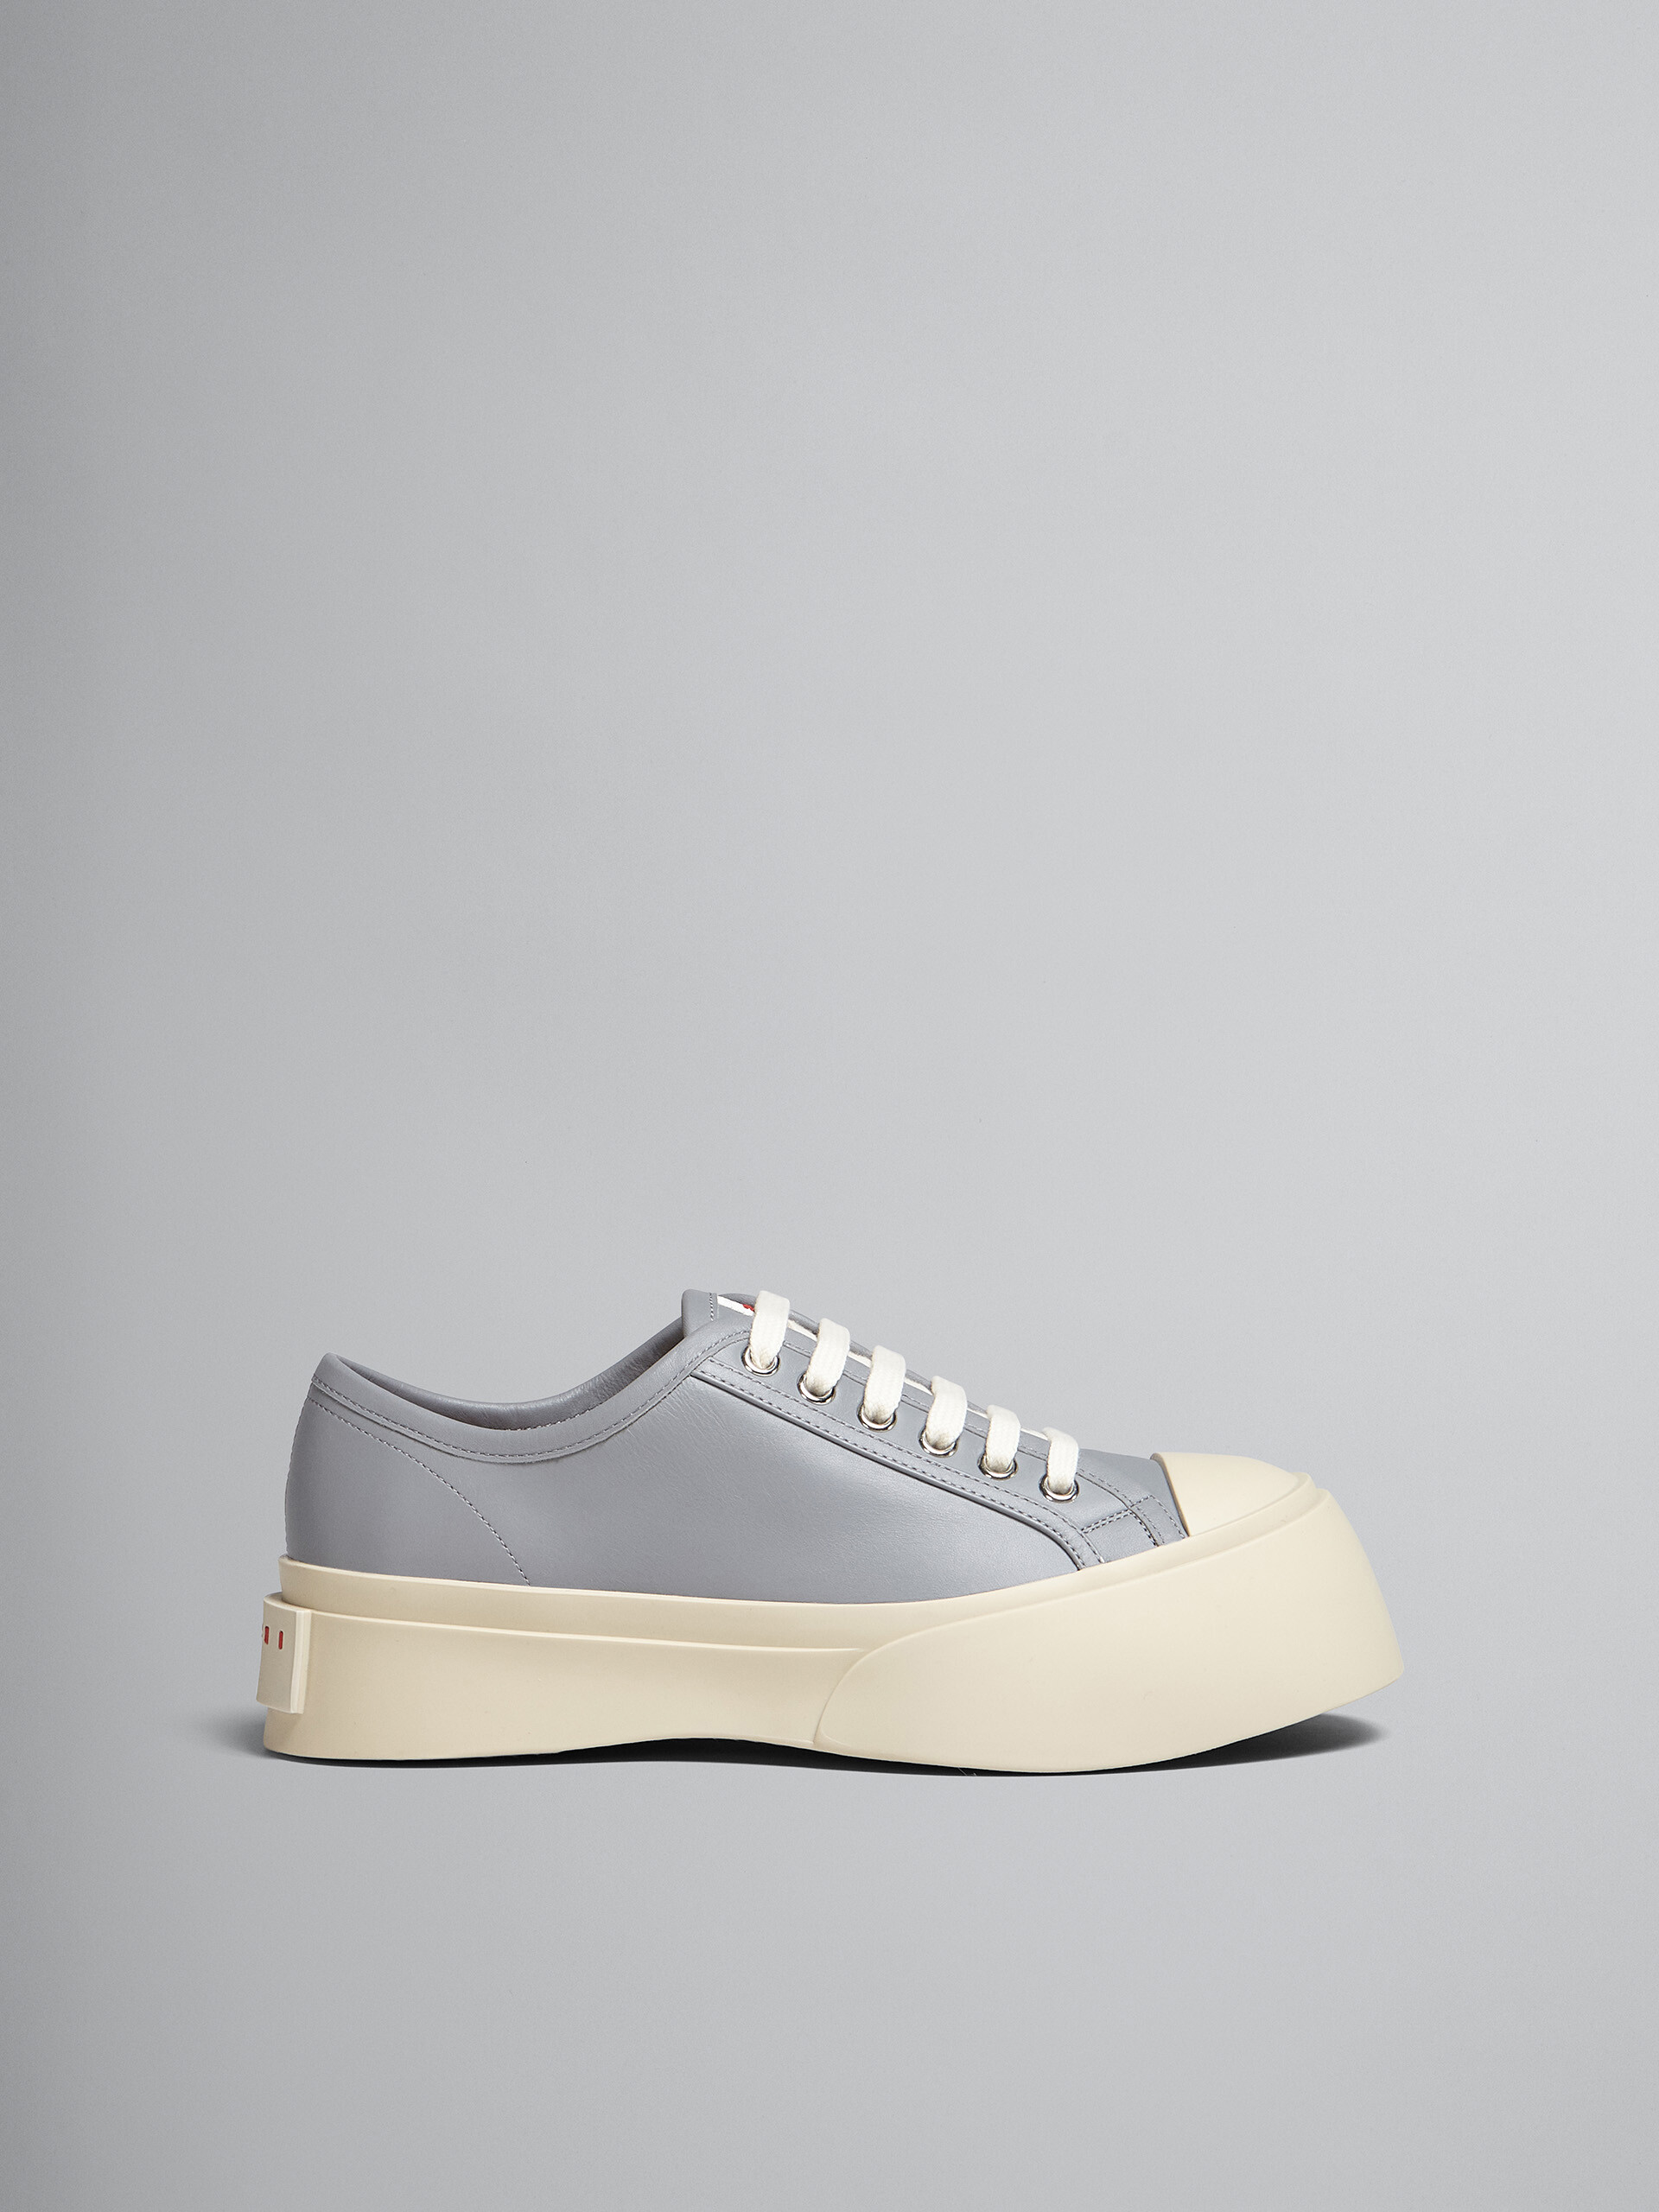 Grey leather Pablo lace-up sneaker - Sneakers - Image 1